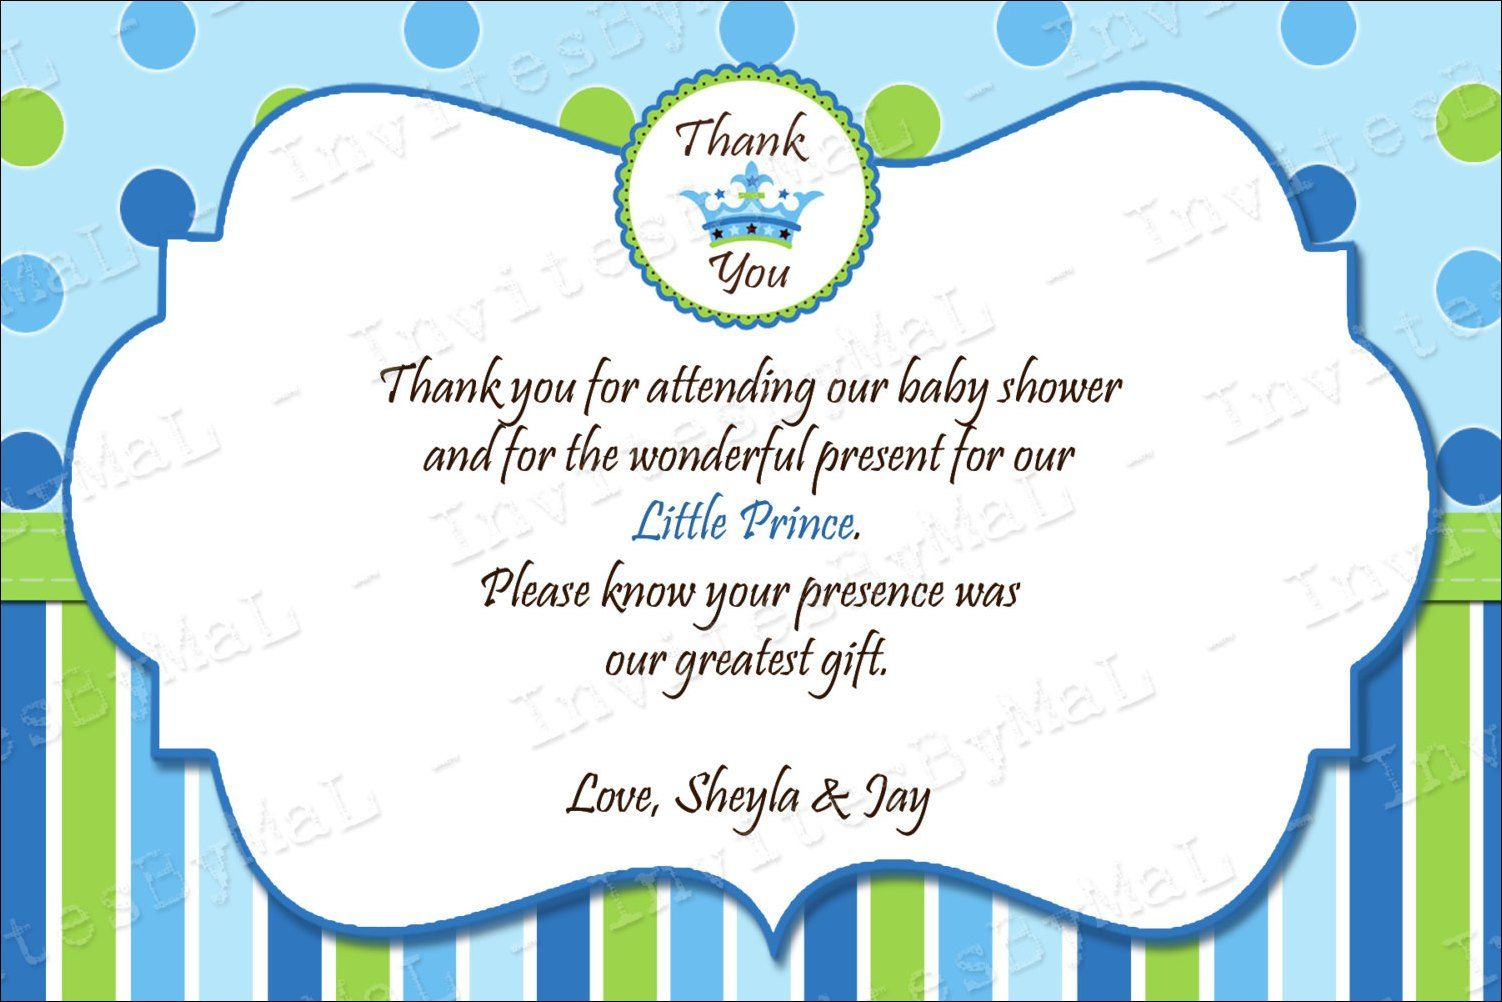 40 Beautiful Baby Shower Thank You Cards Ideas | Baby | Baby Inside Thank You Card Template For Baby Shower